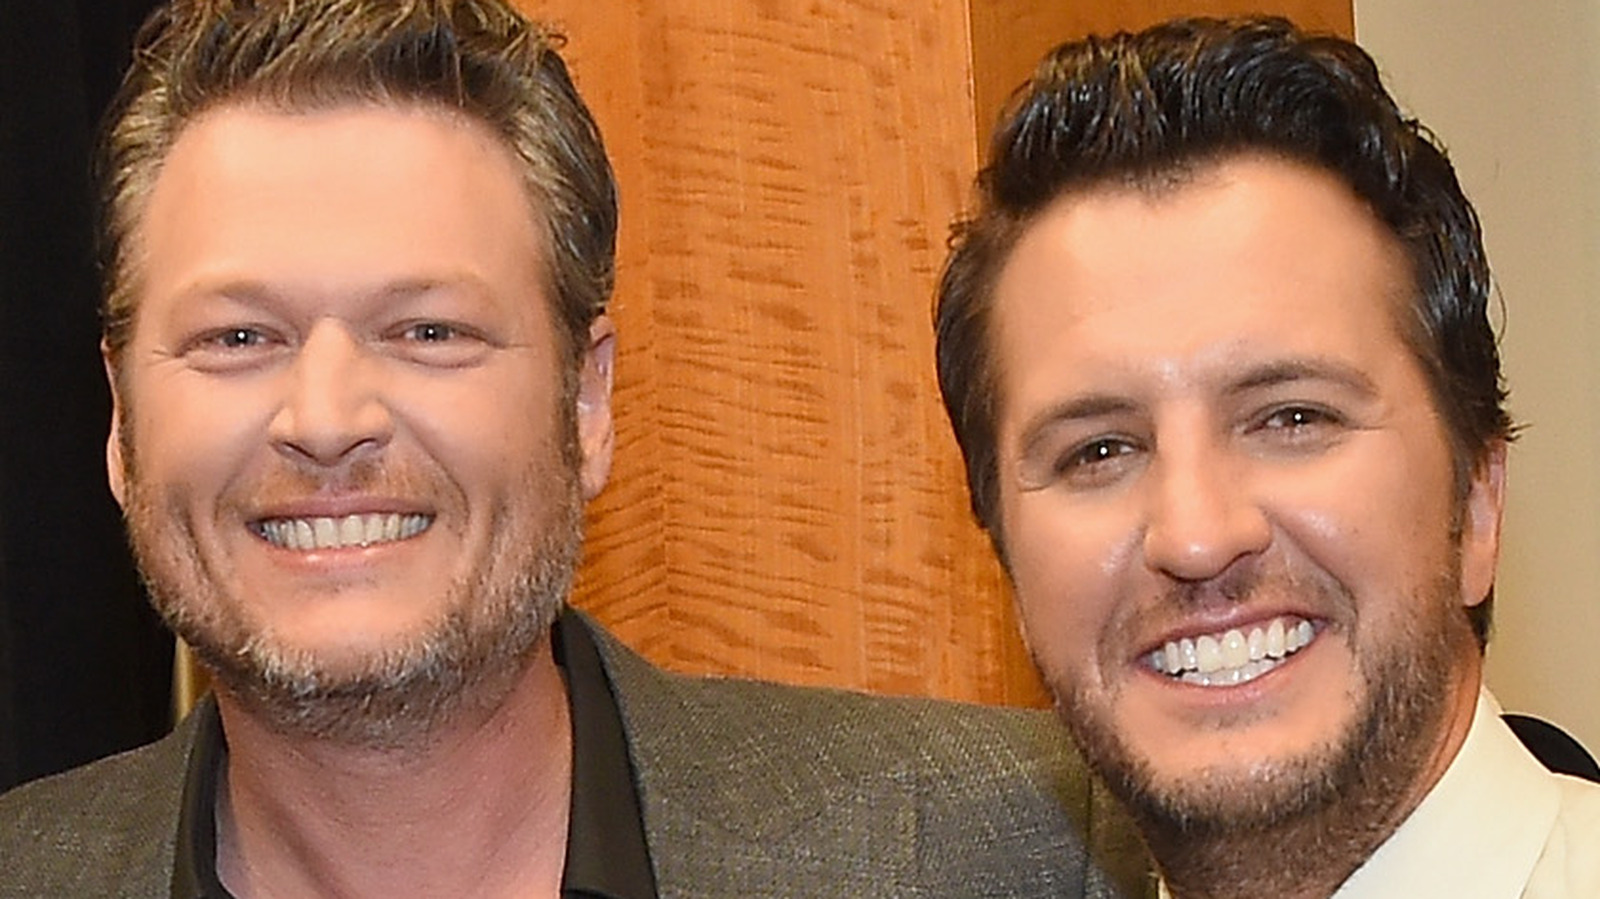 Luke Bryan And Blake Shelton: Are They Still Friends Or Is Their ‘Feud’ Real? – Nicki Swift